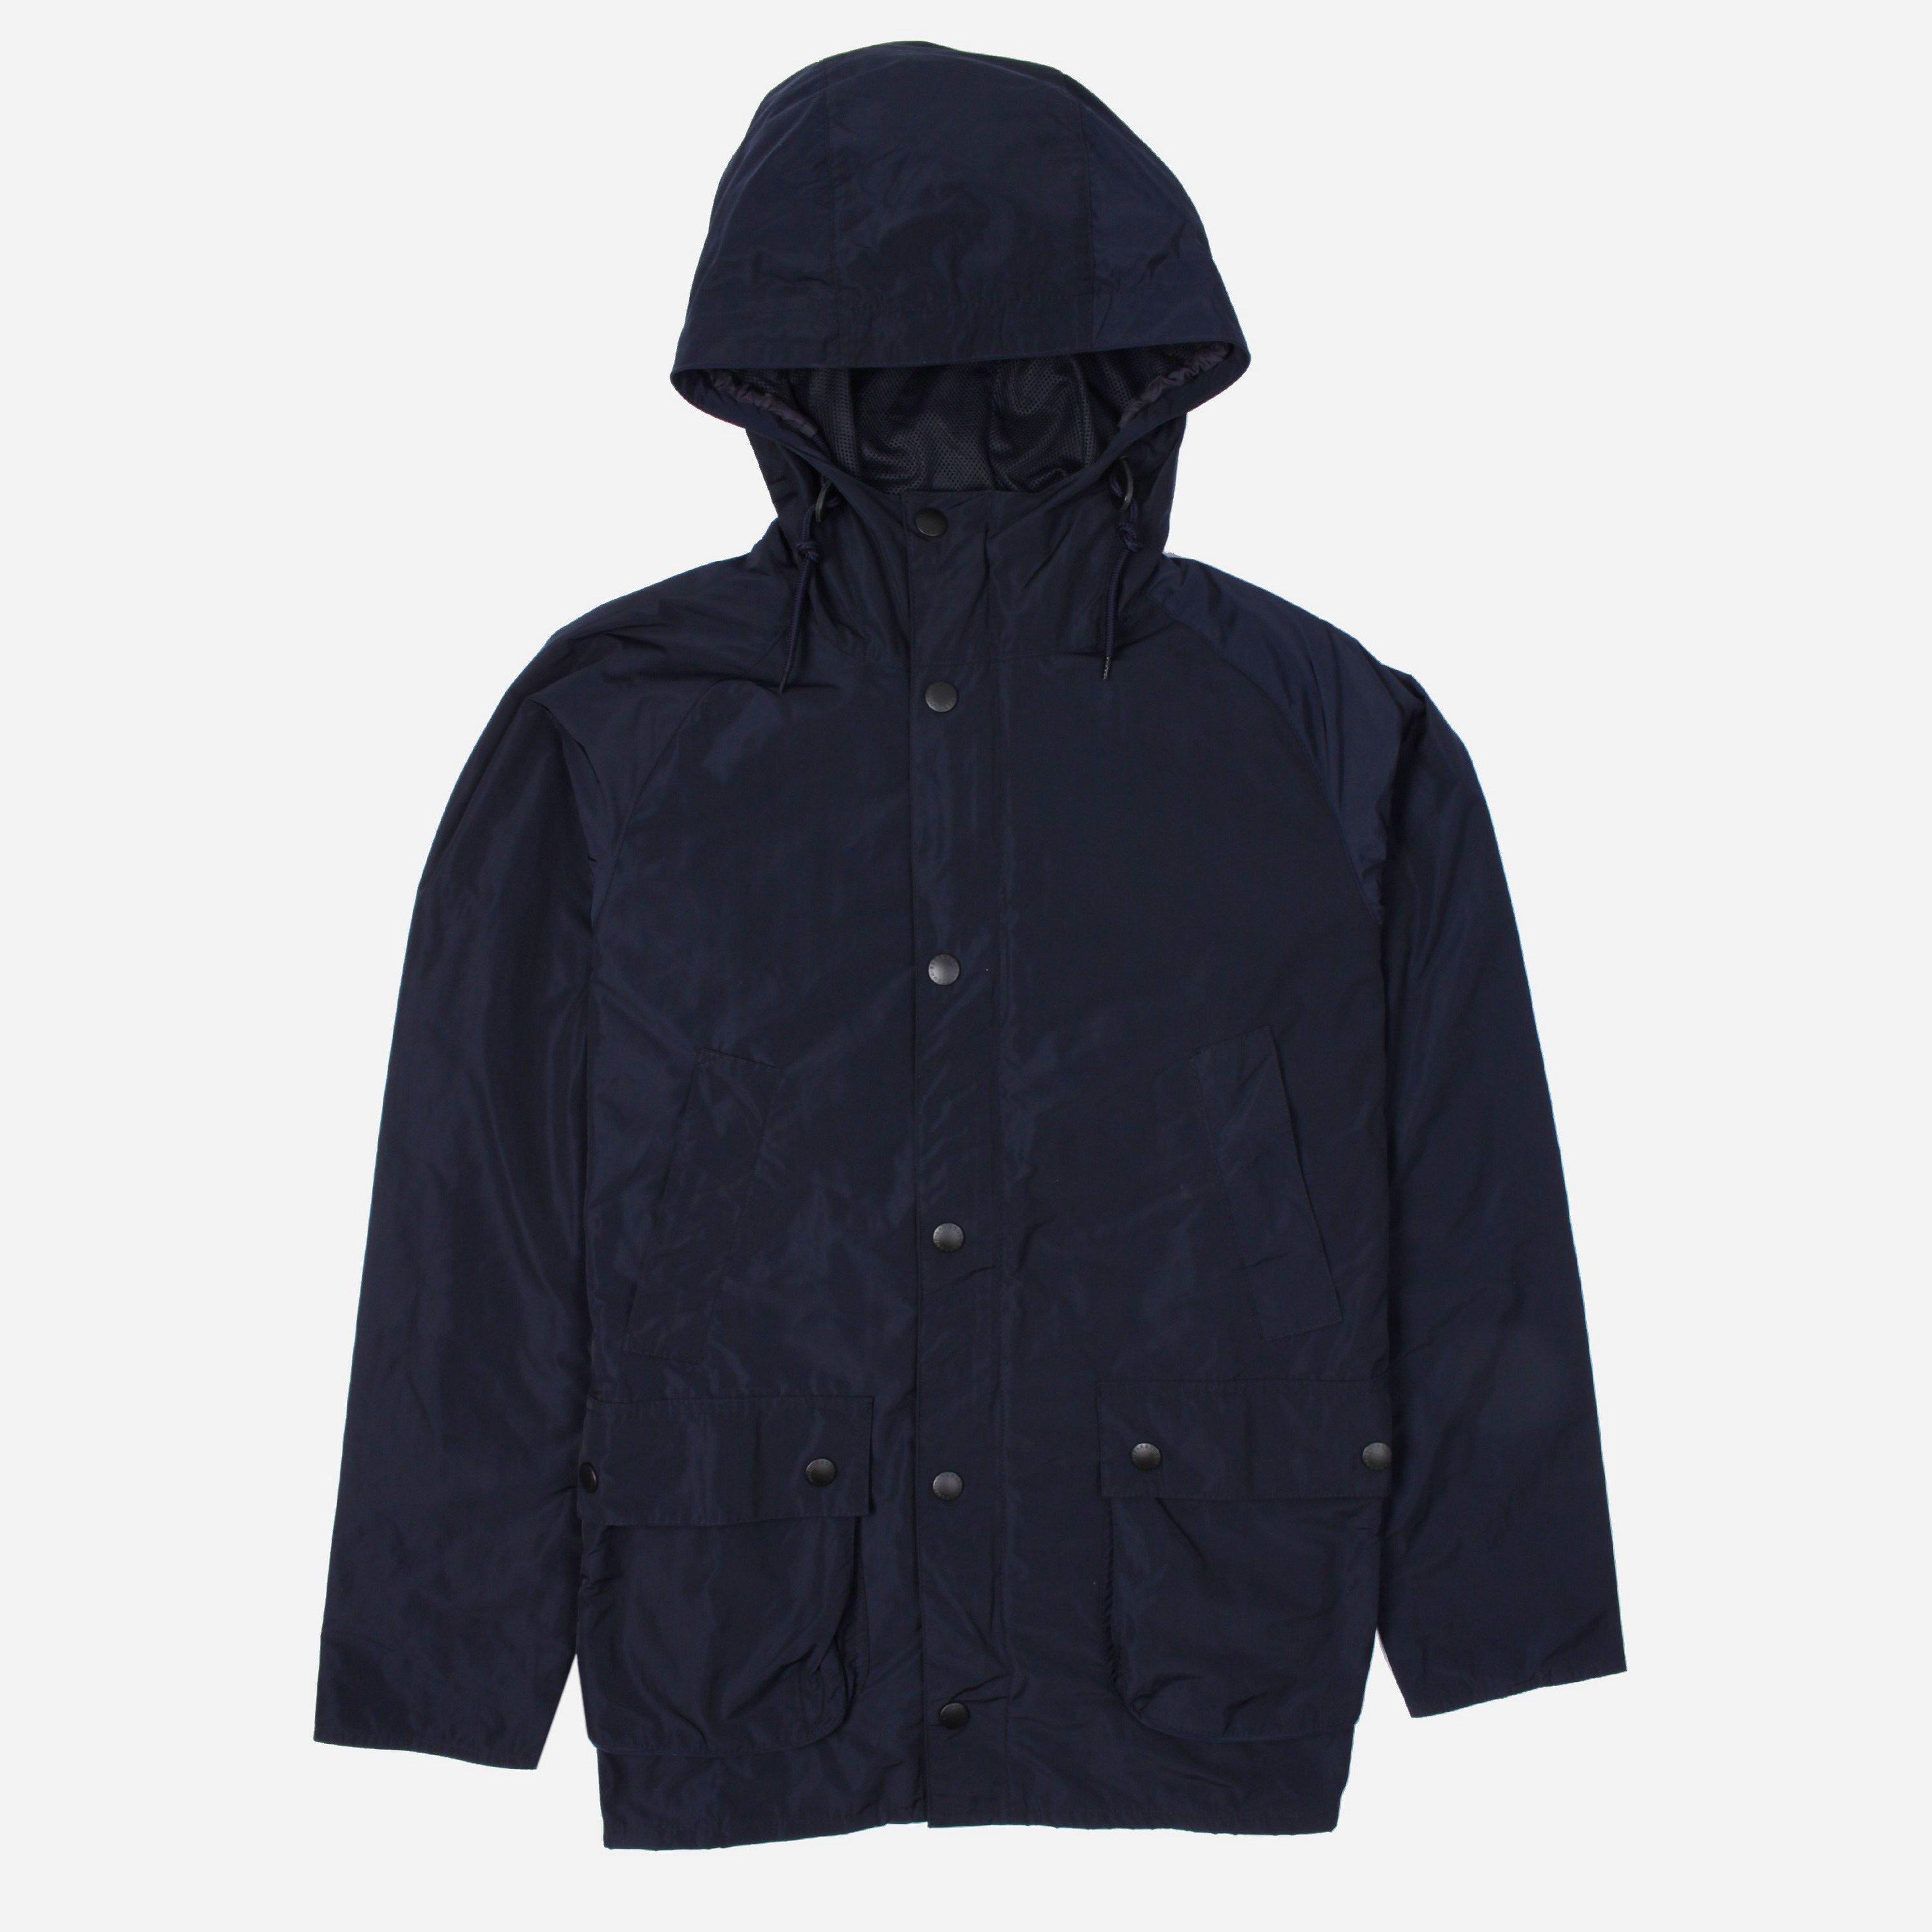 Barbour Synthetic Hooded Bedale Jacket in Navy (Blue) for Men - Lyst